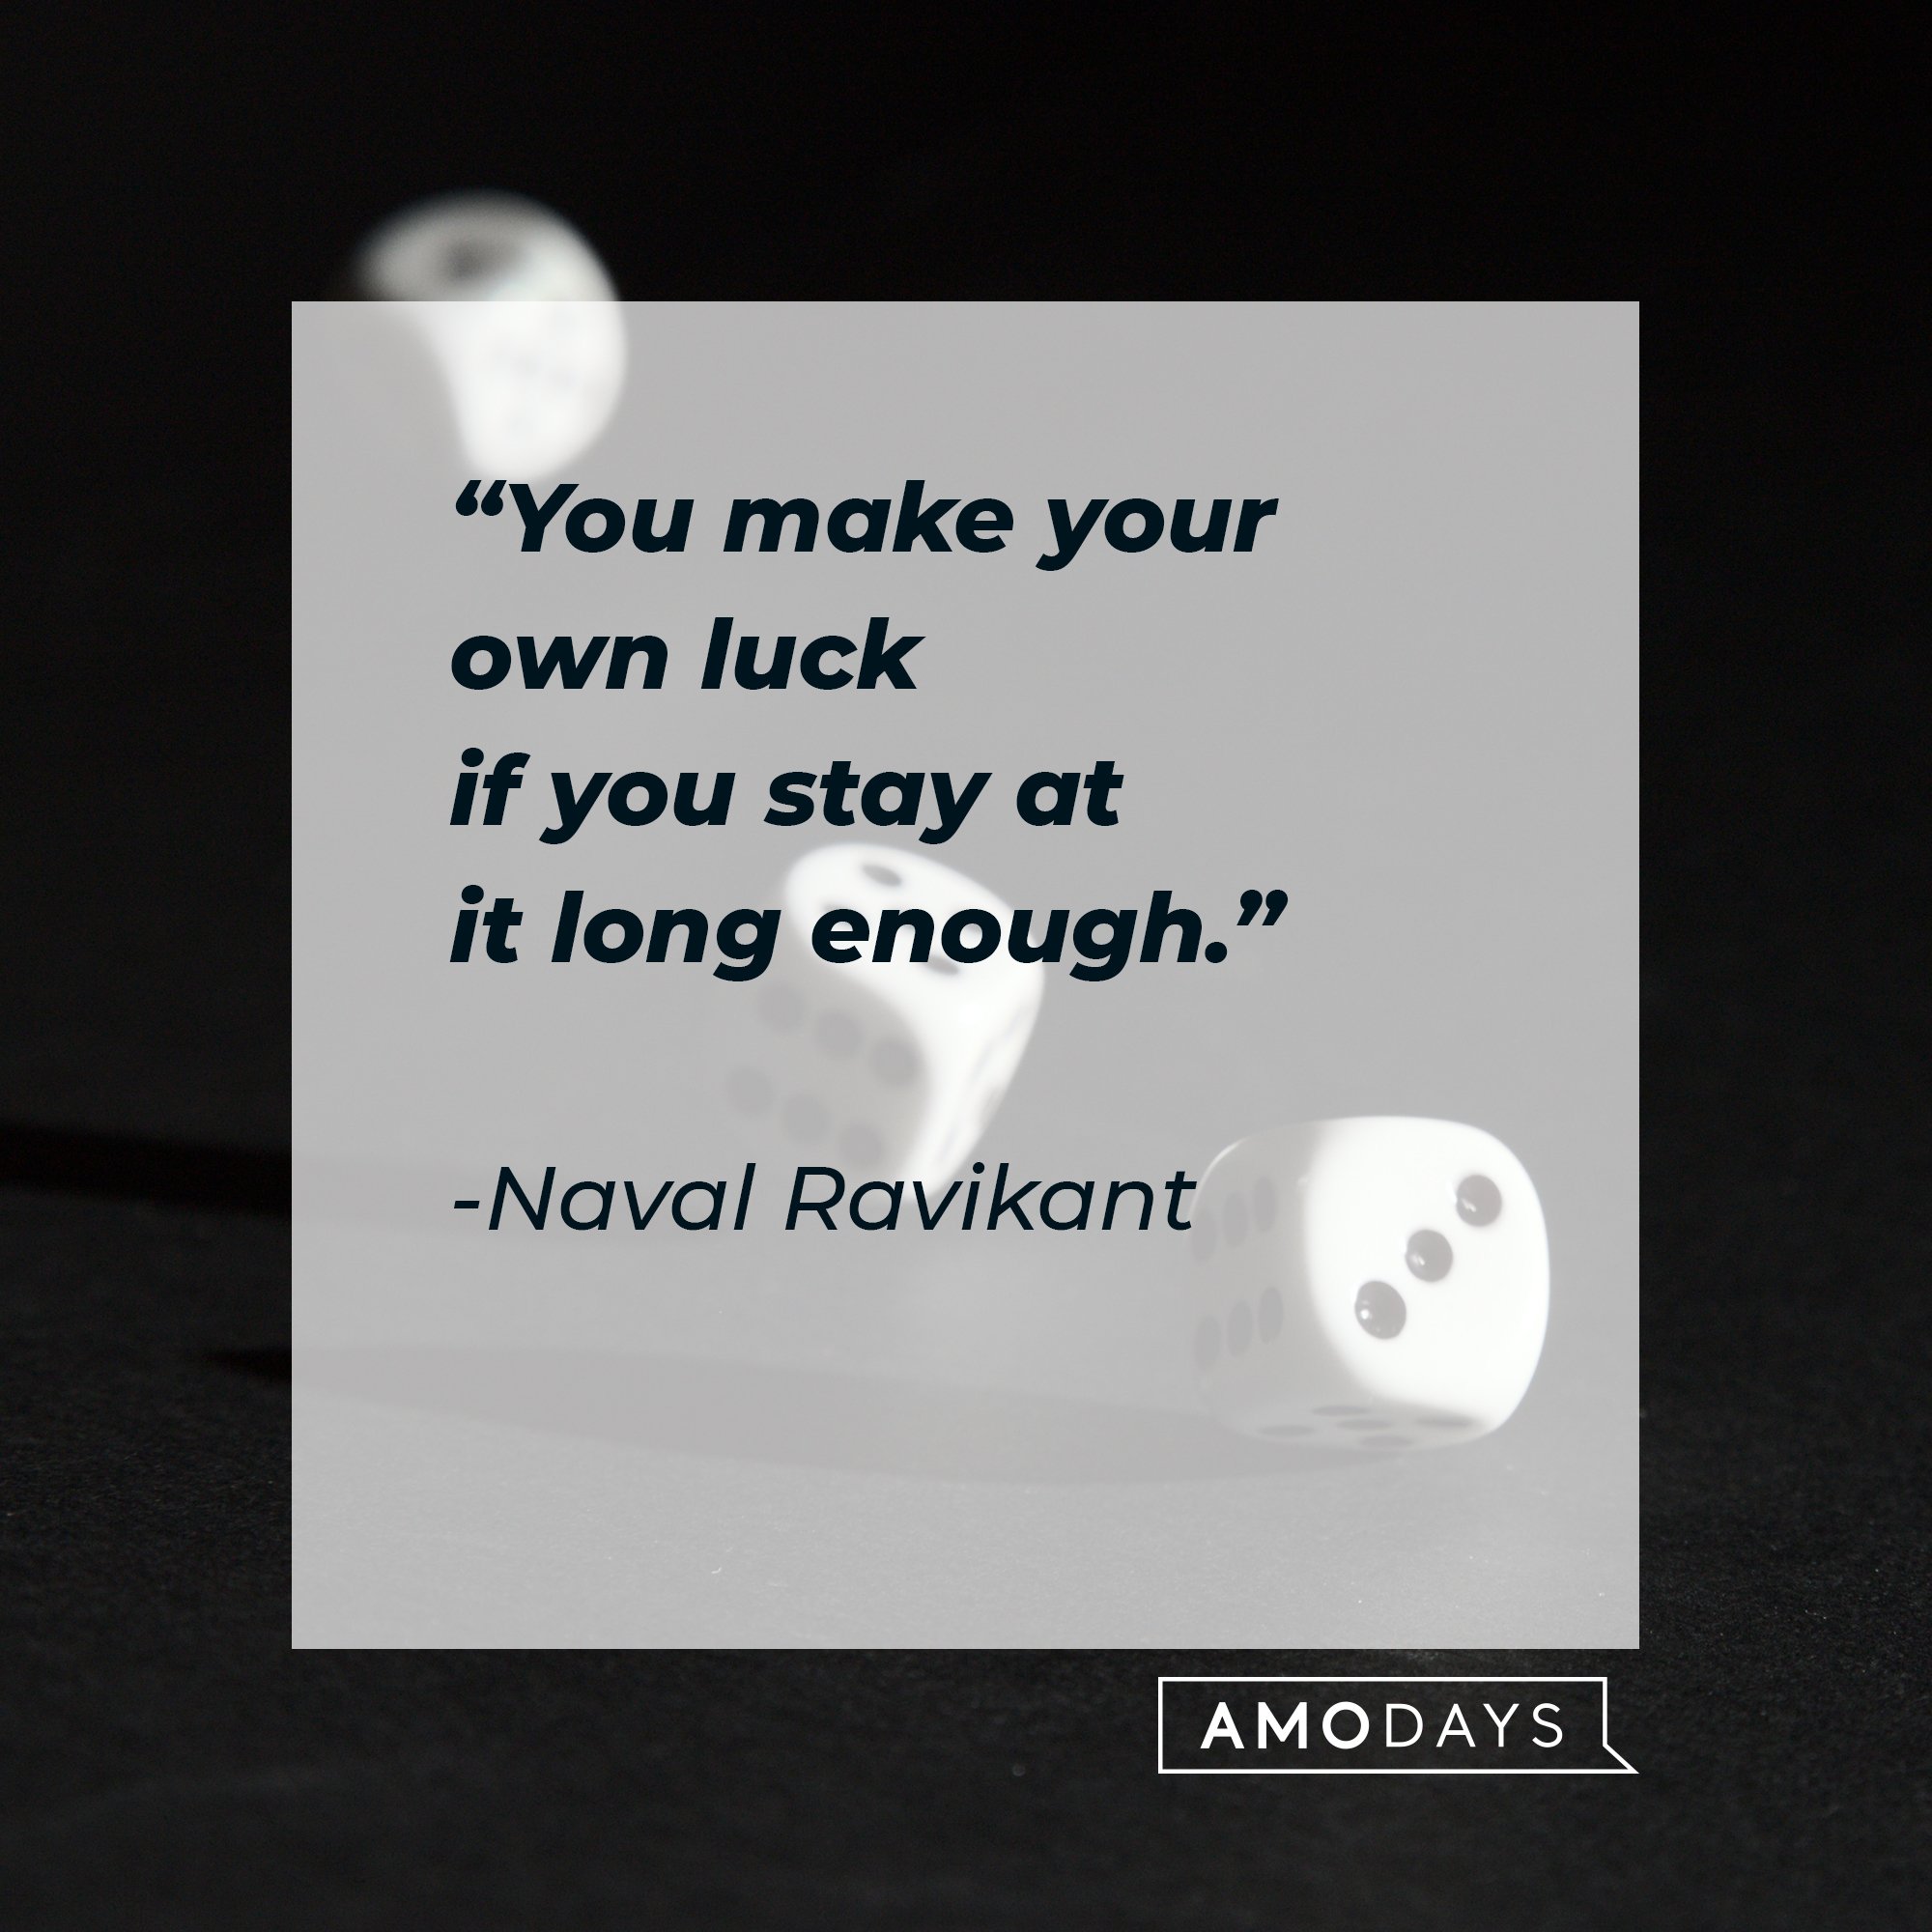 Naval Ravikant's quote: "You make your own luck if you stay at it long enough." | Image: AmoDays